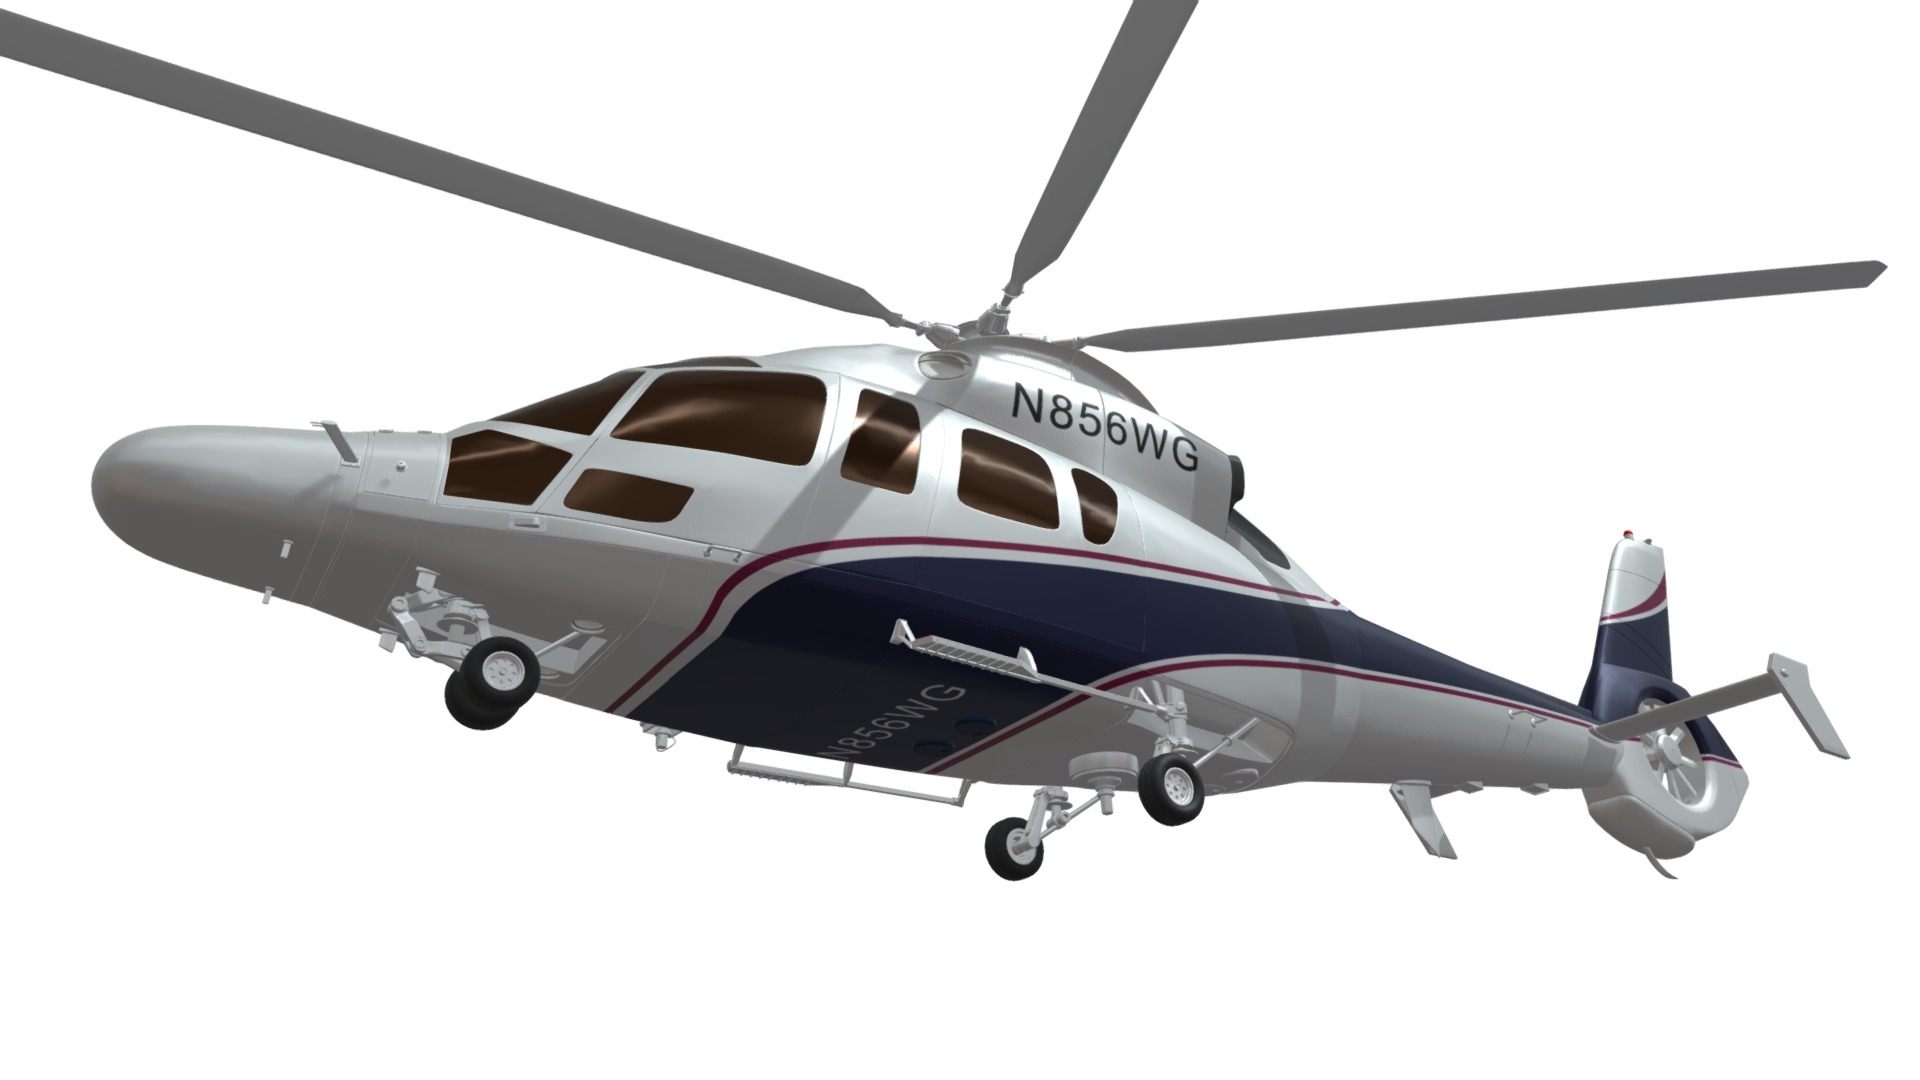 3D model Eurocopter EC155 - This is a 3D model of the Eurocopter EC155. The 3D model is about a helicopter in the sky.